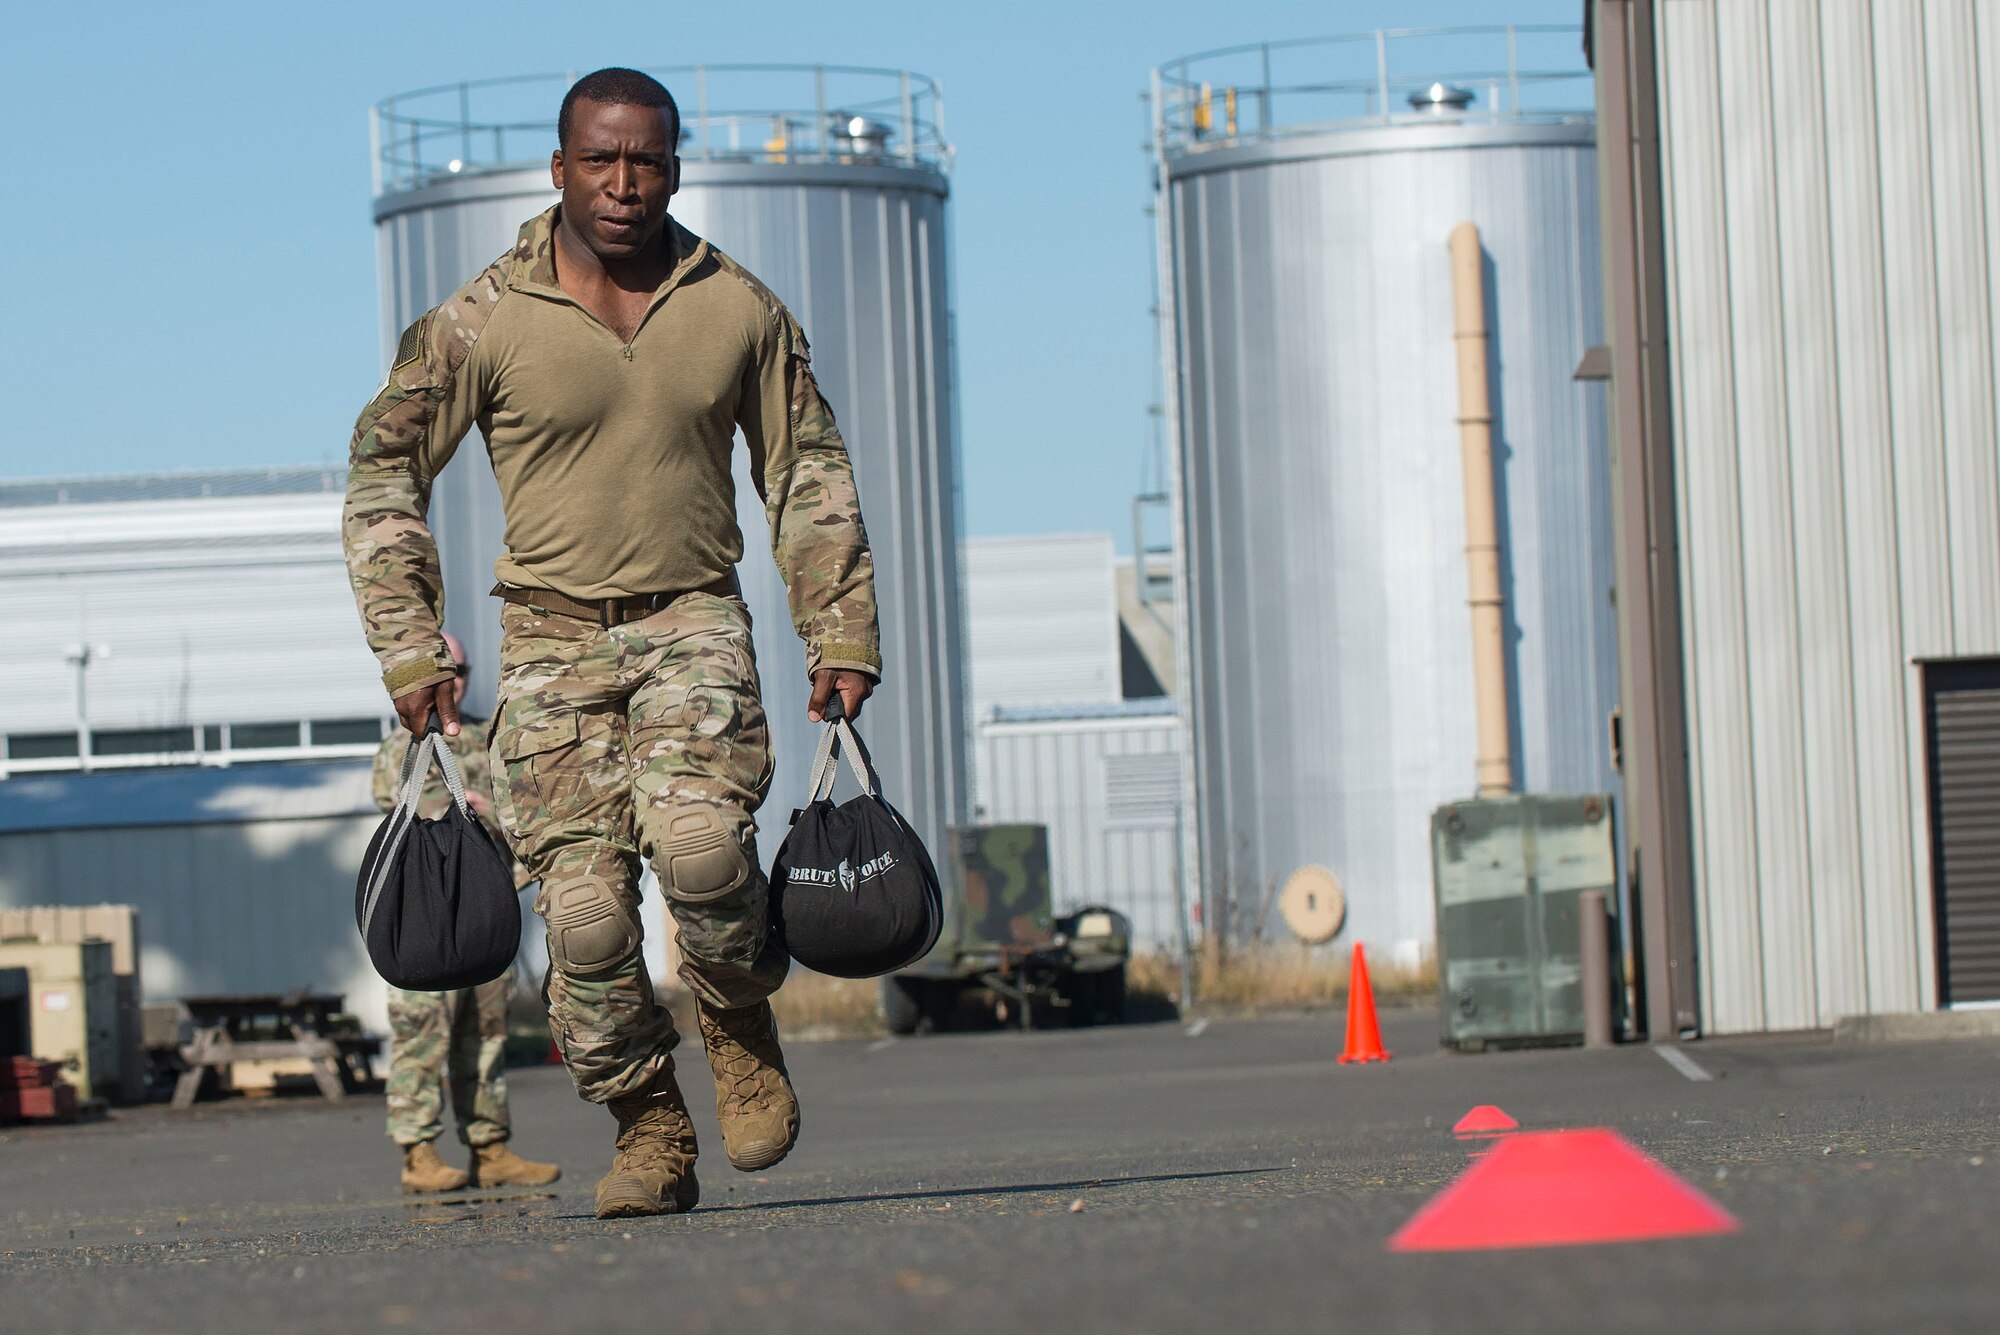 A U.S. Air Force Tactical Air Control Party (TACP) Airman assigned to the 7th Air Support Operations Squadron, Fort Bliss, Texas, runs while carrying weighted bags as part of a Tier II Operator Fitness Test during the 2019 Lightning Challenge at Joint Base Lewis-McChord, Wash., July 29, 2019.